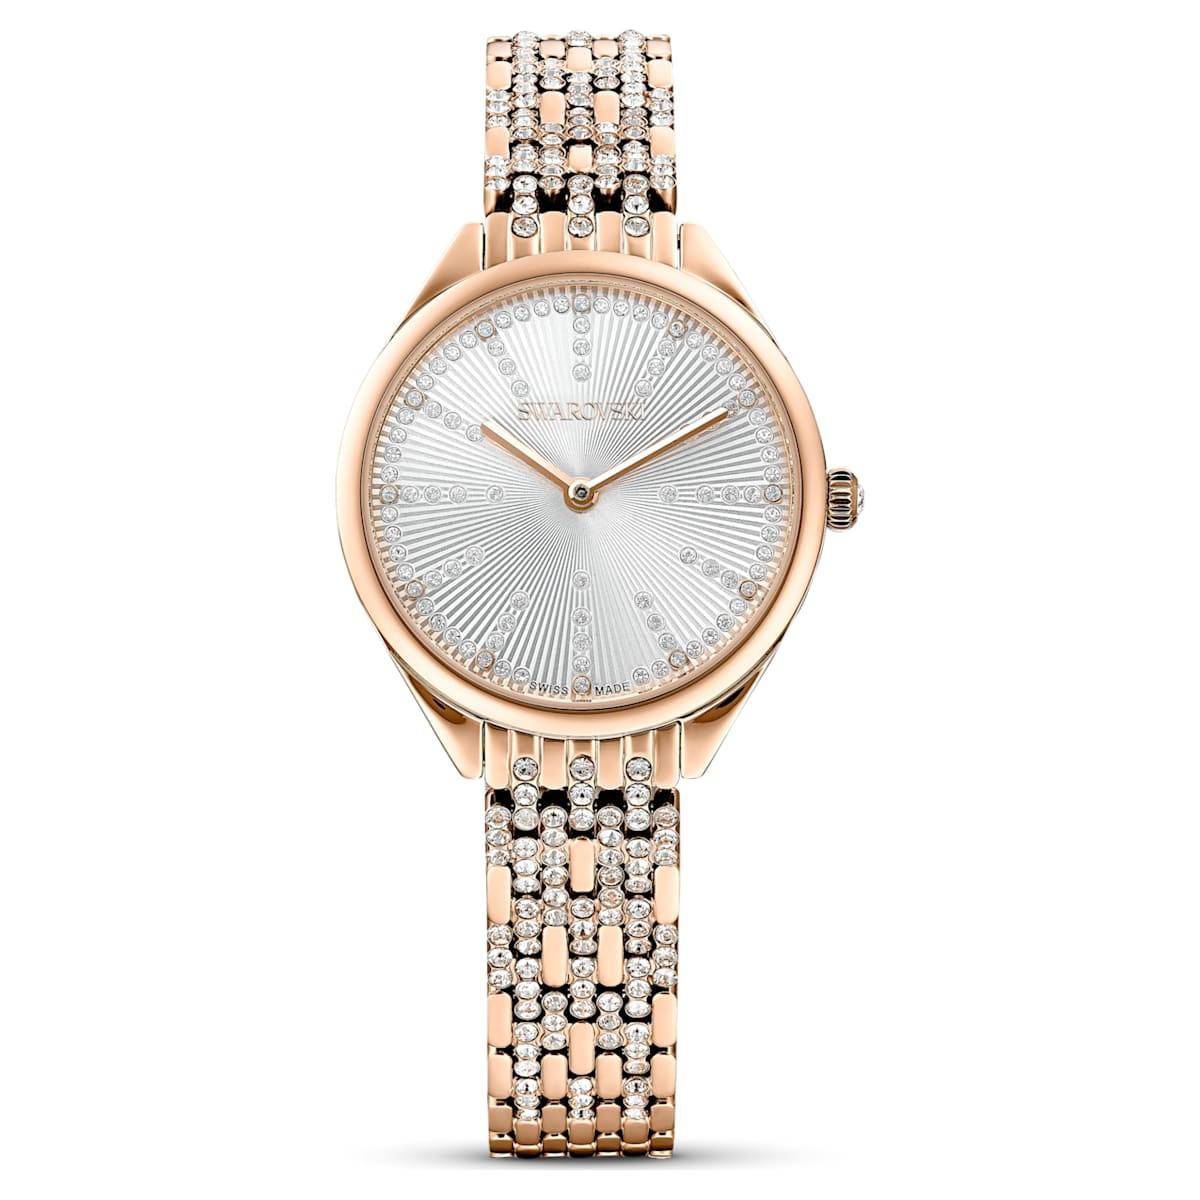 Montre Attract couleur or rose Swarovski